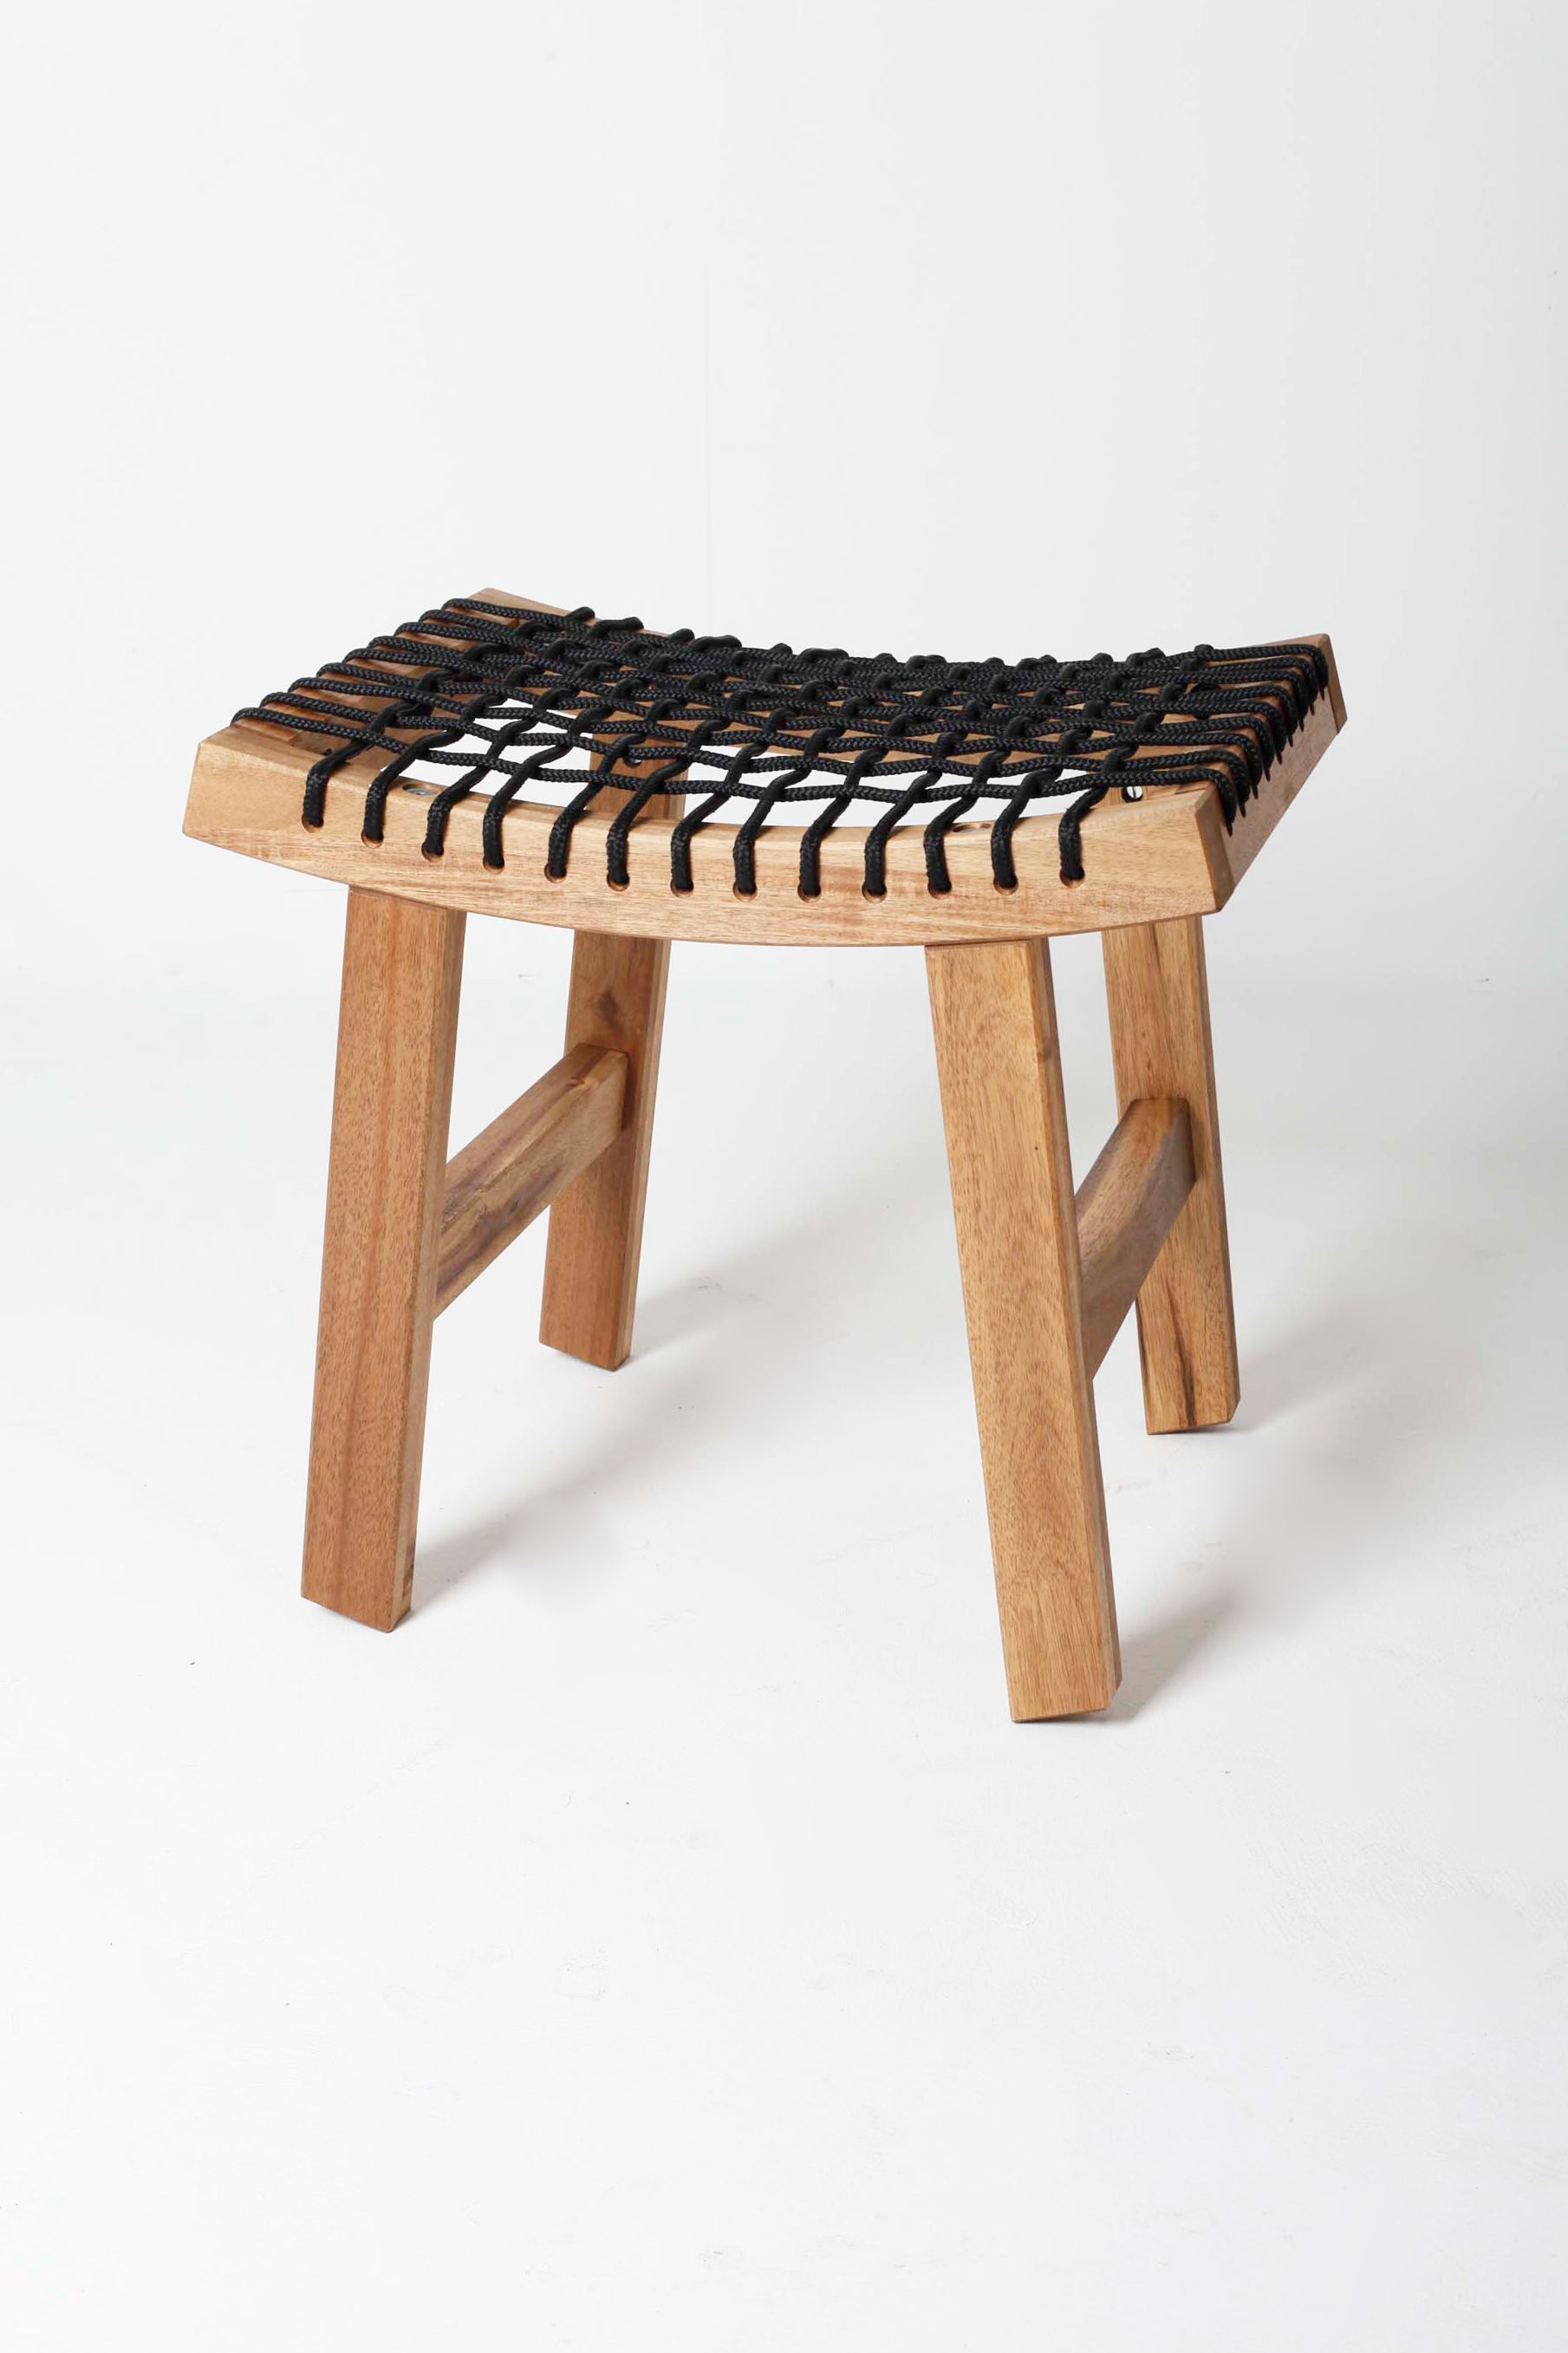 WOODEN STOOL WITH CROCHET STRING SEAT